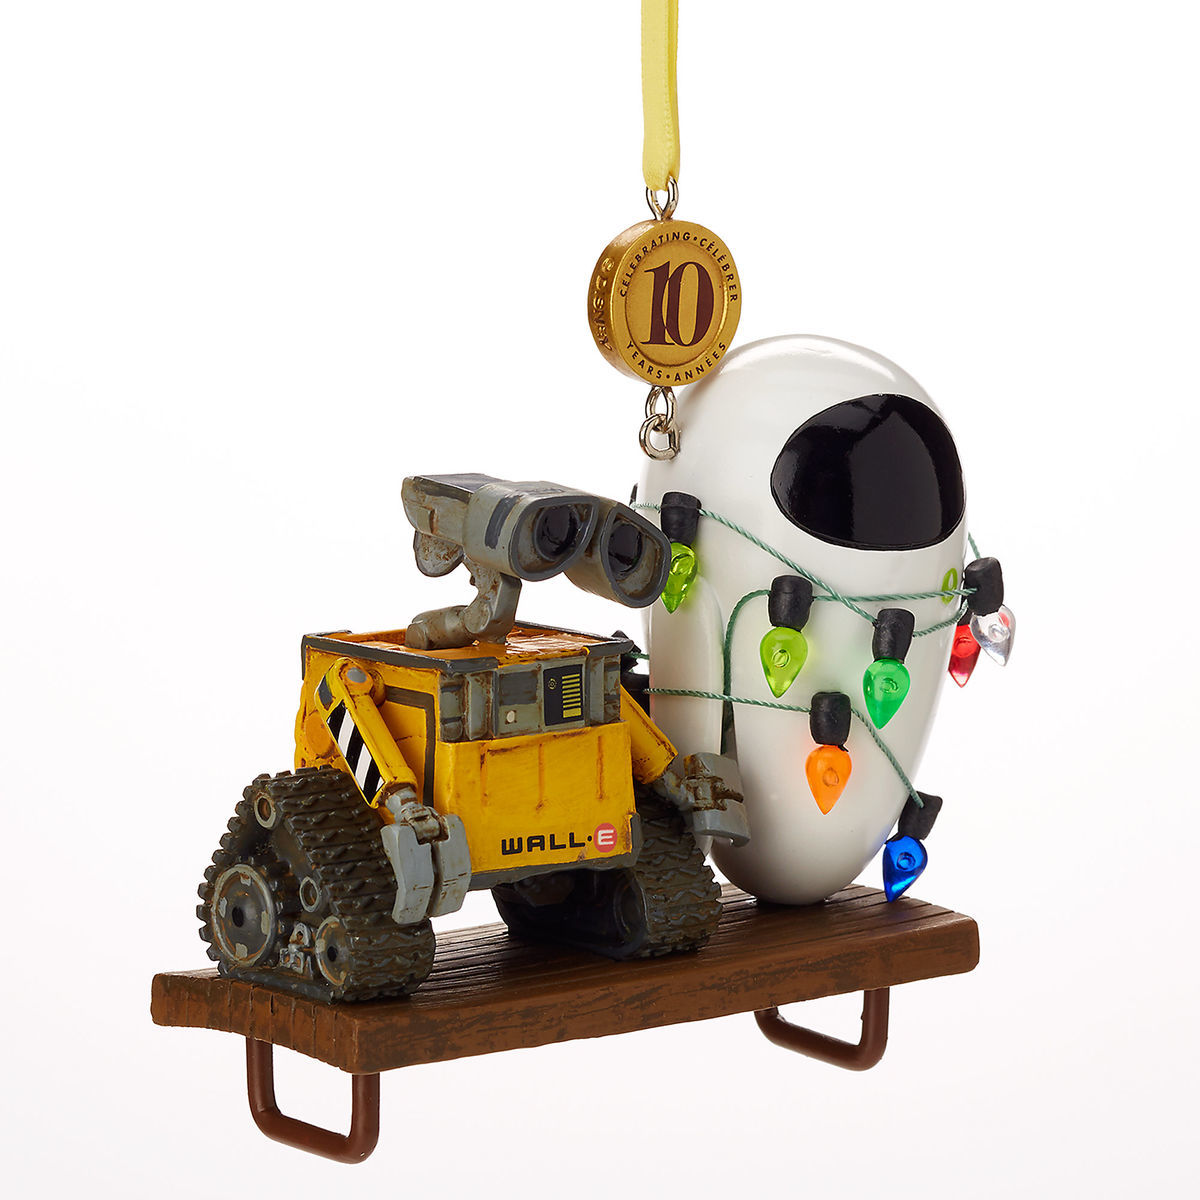 Disney Holiday Wall-E & Eve Ornament Disney Theme Parks Exclusive & Limited Availability 